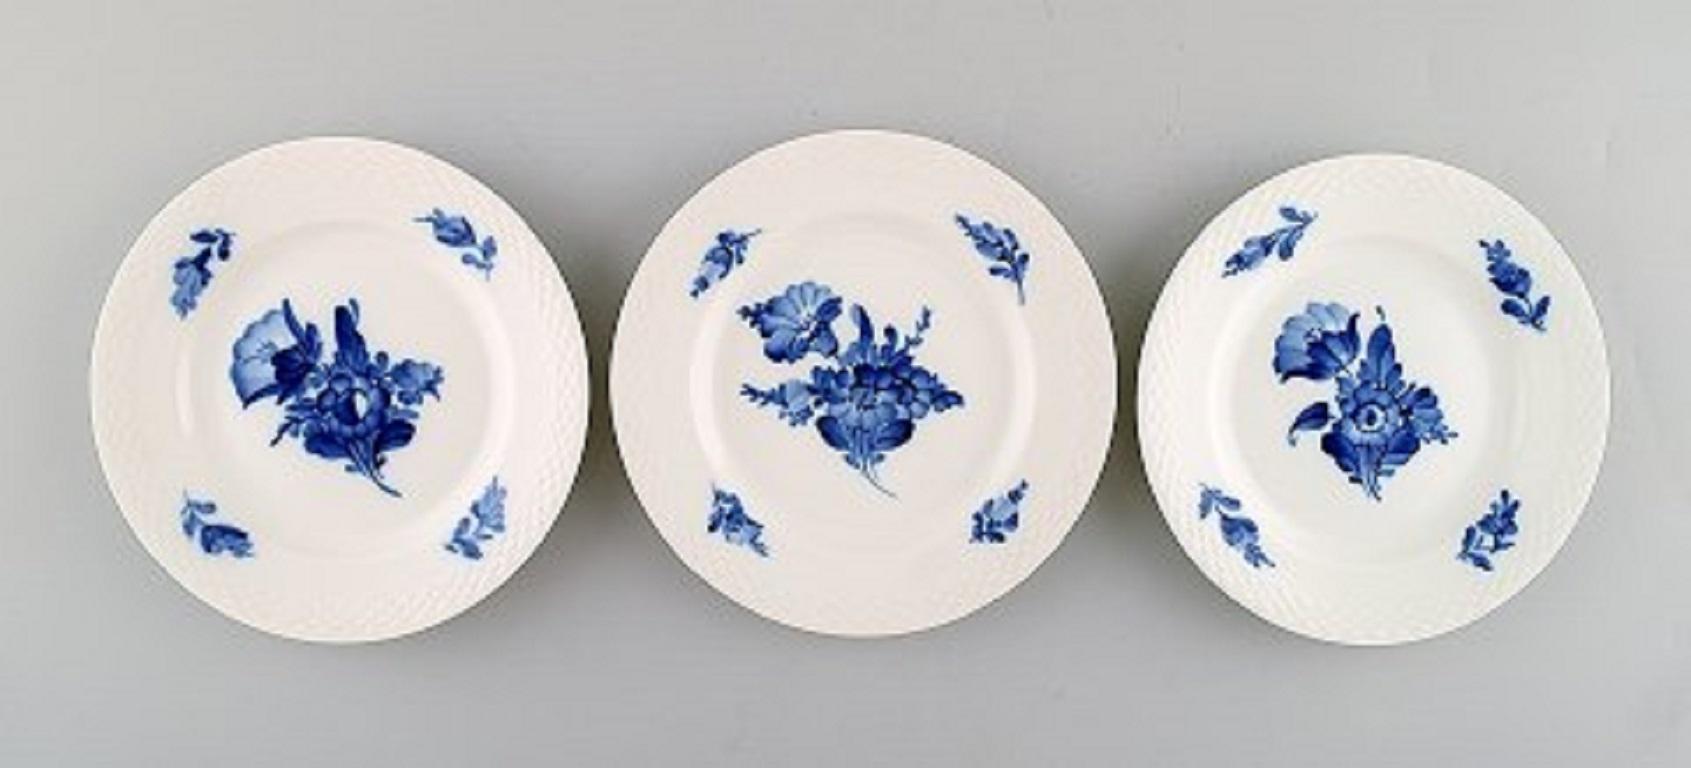 Ten blue flower braided cake plates from Royal Copenhagen.
Number 10/8092.
Stamped.
2nd factory quality. In perfect condition.
Measures: 16 cm.